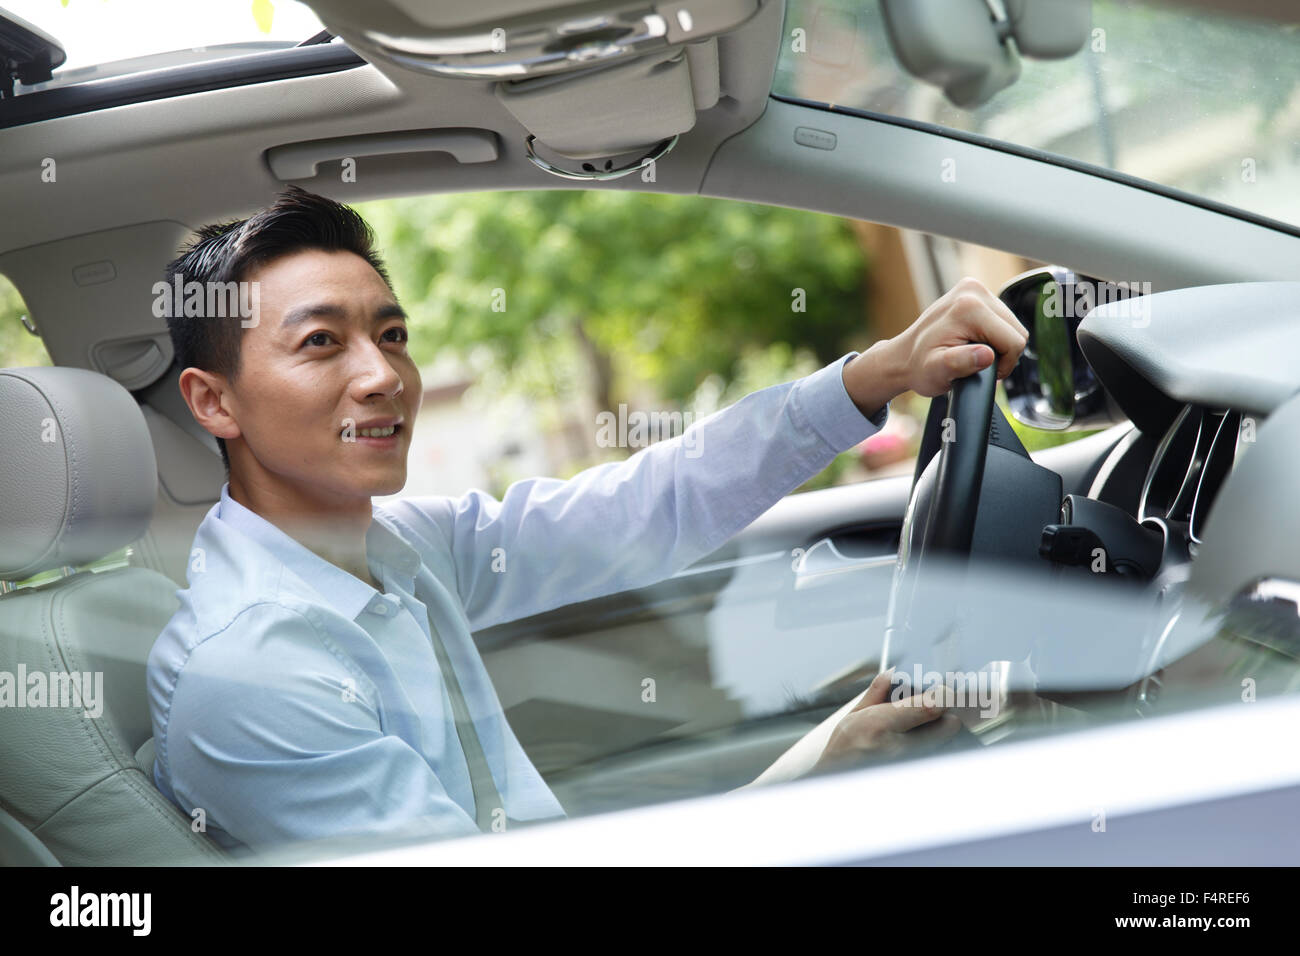 Young man driving Stock Photo